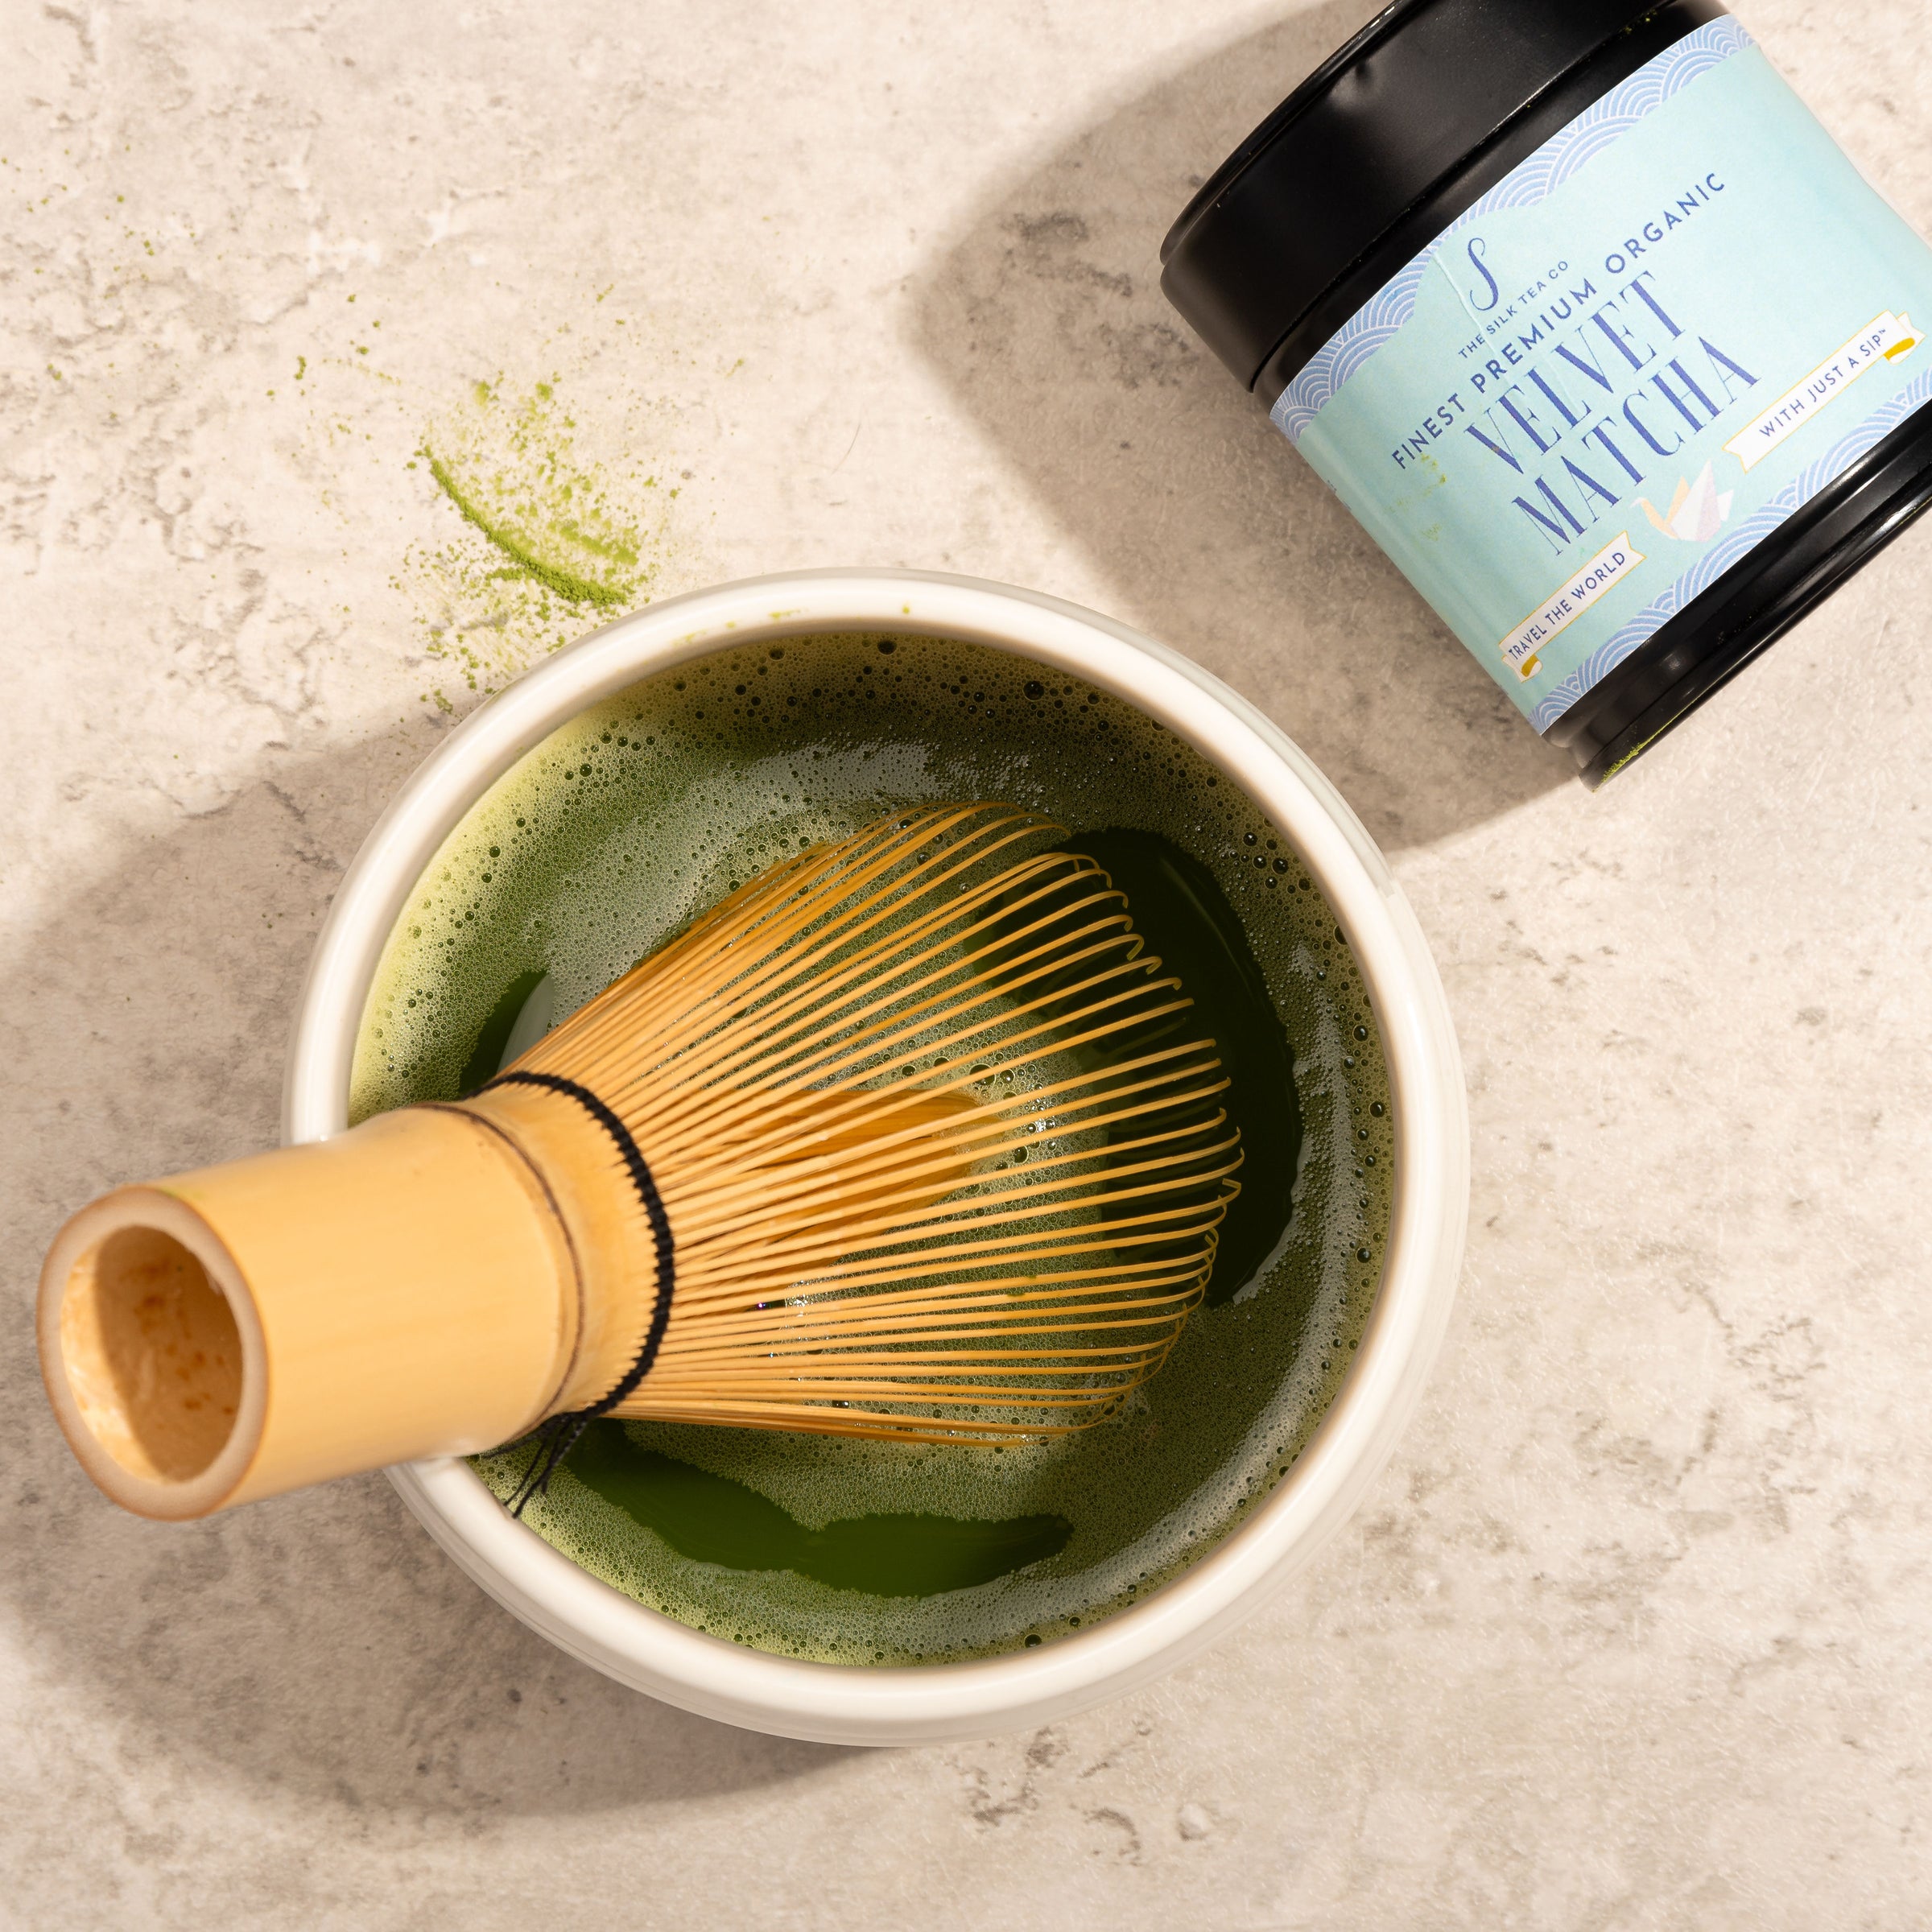 Chasen Japanese matcha whisk in a ceramic bowl with organic matcha and the tin of the product